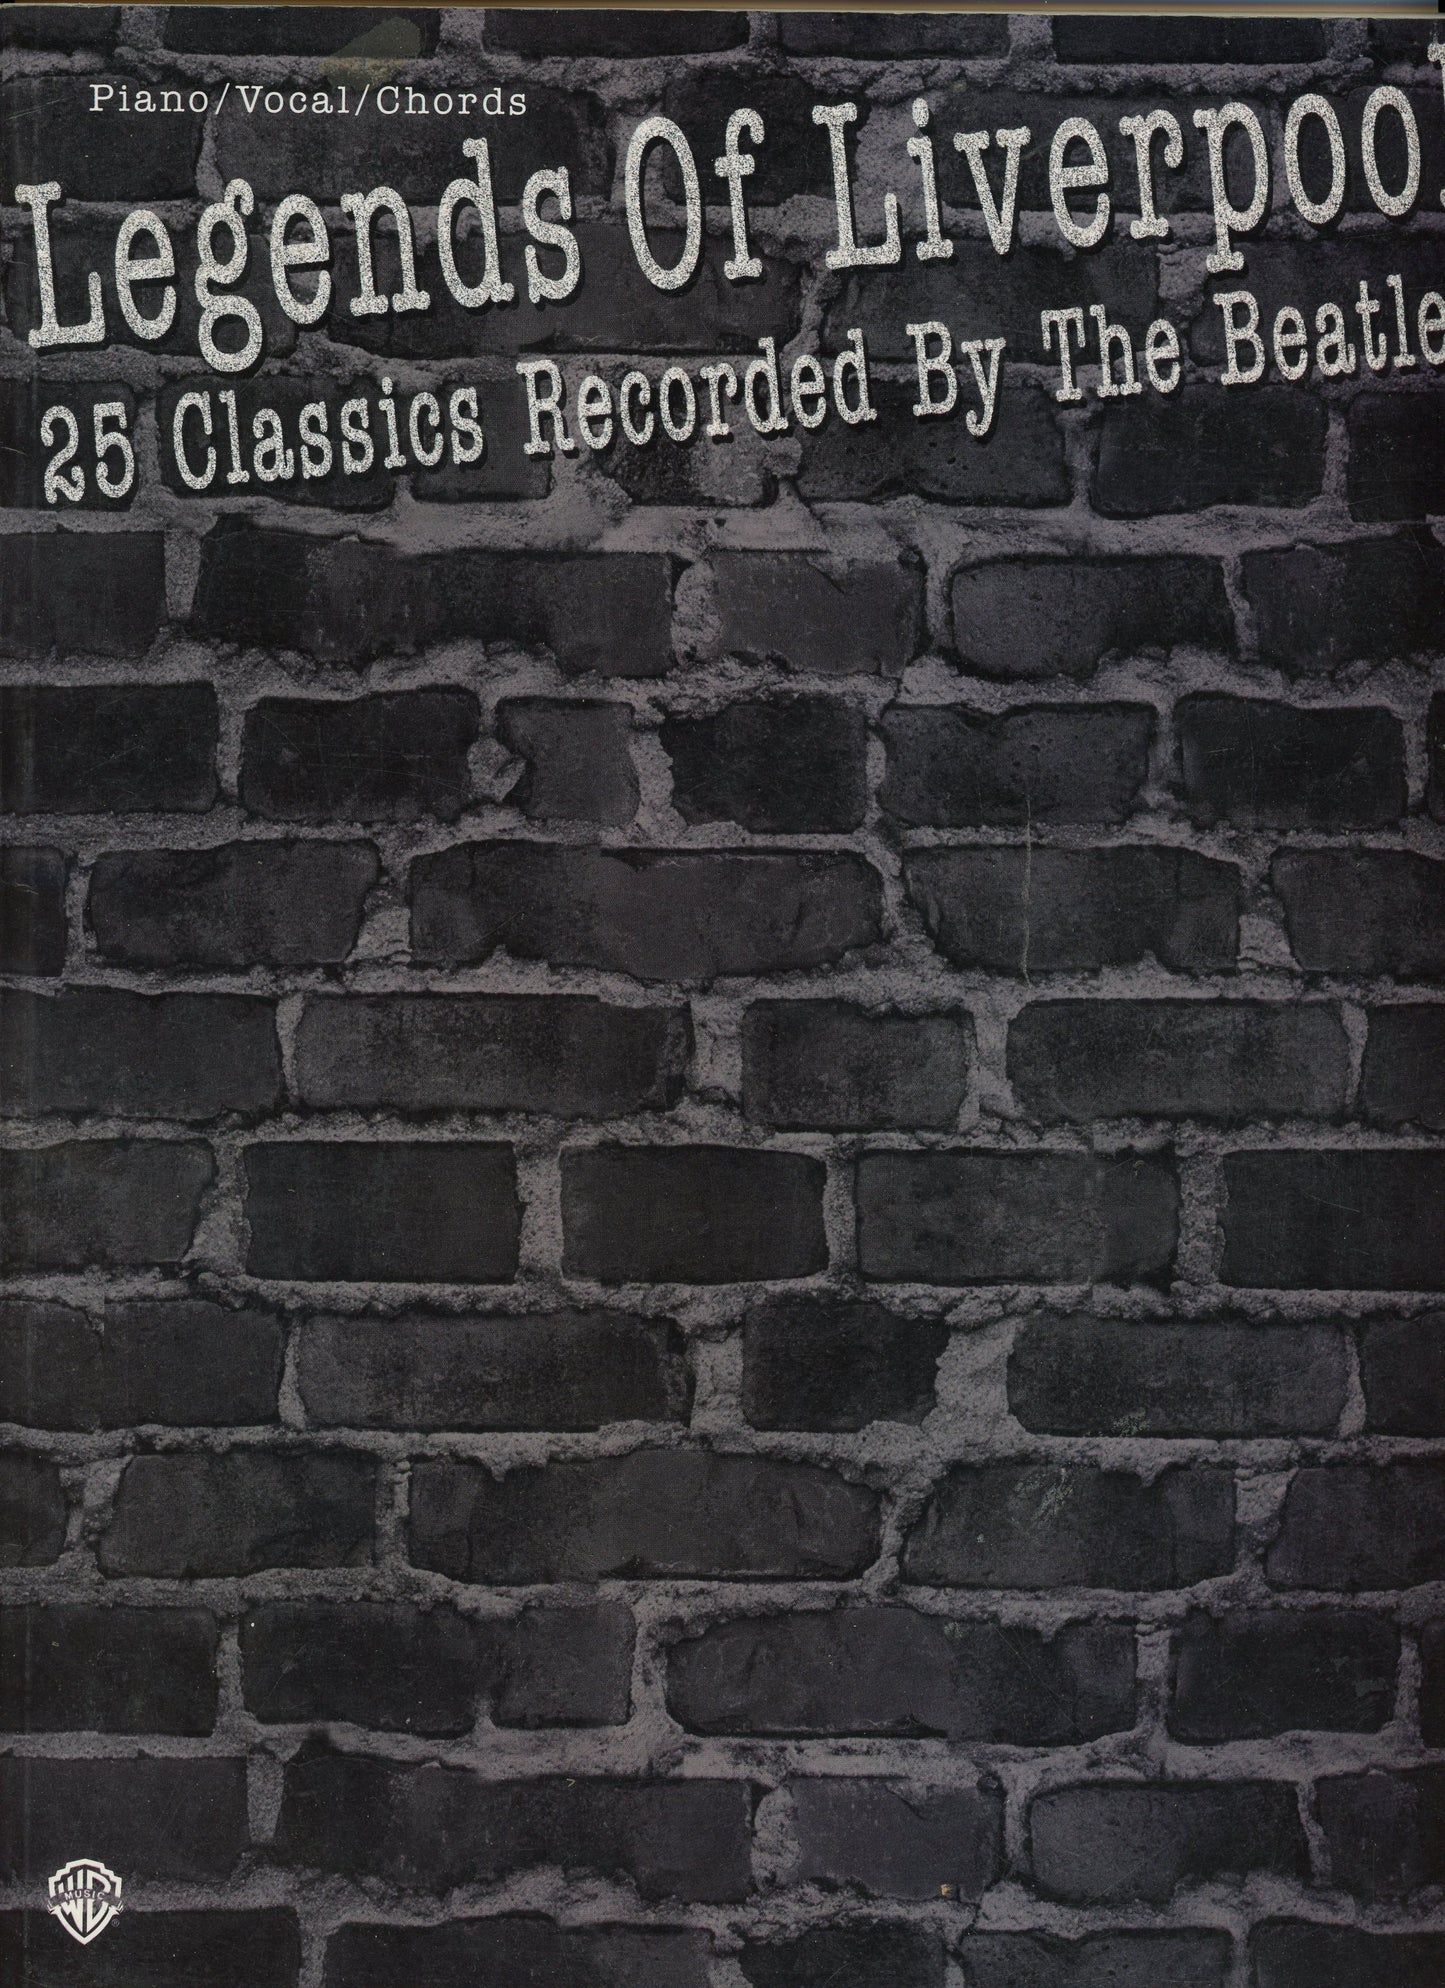 The Beatles Legends of Liverpool Songbook